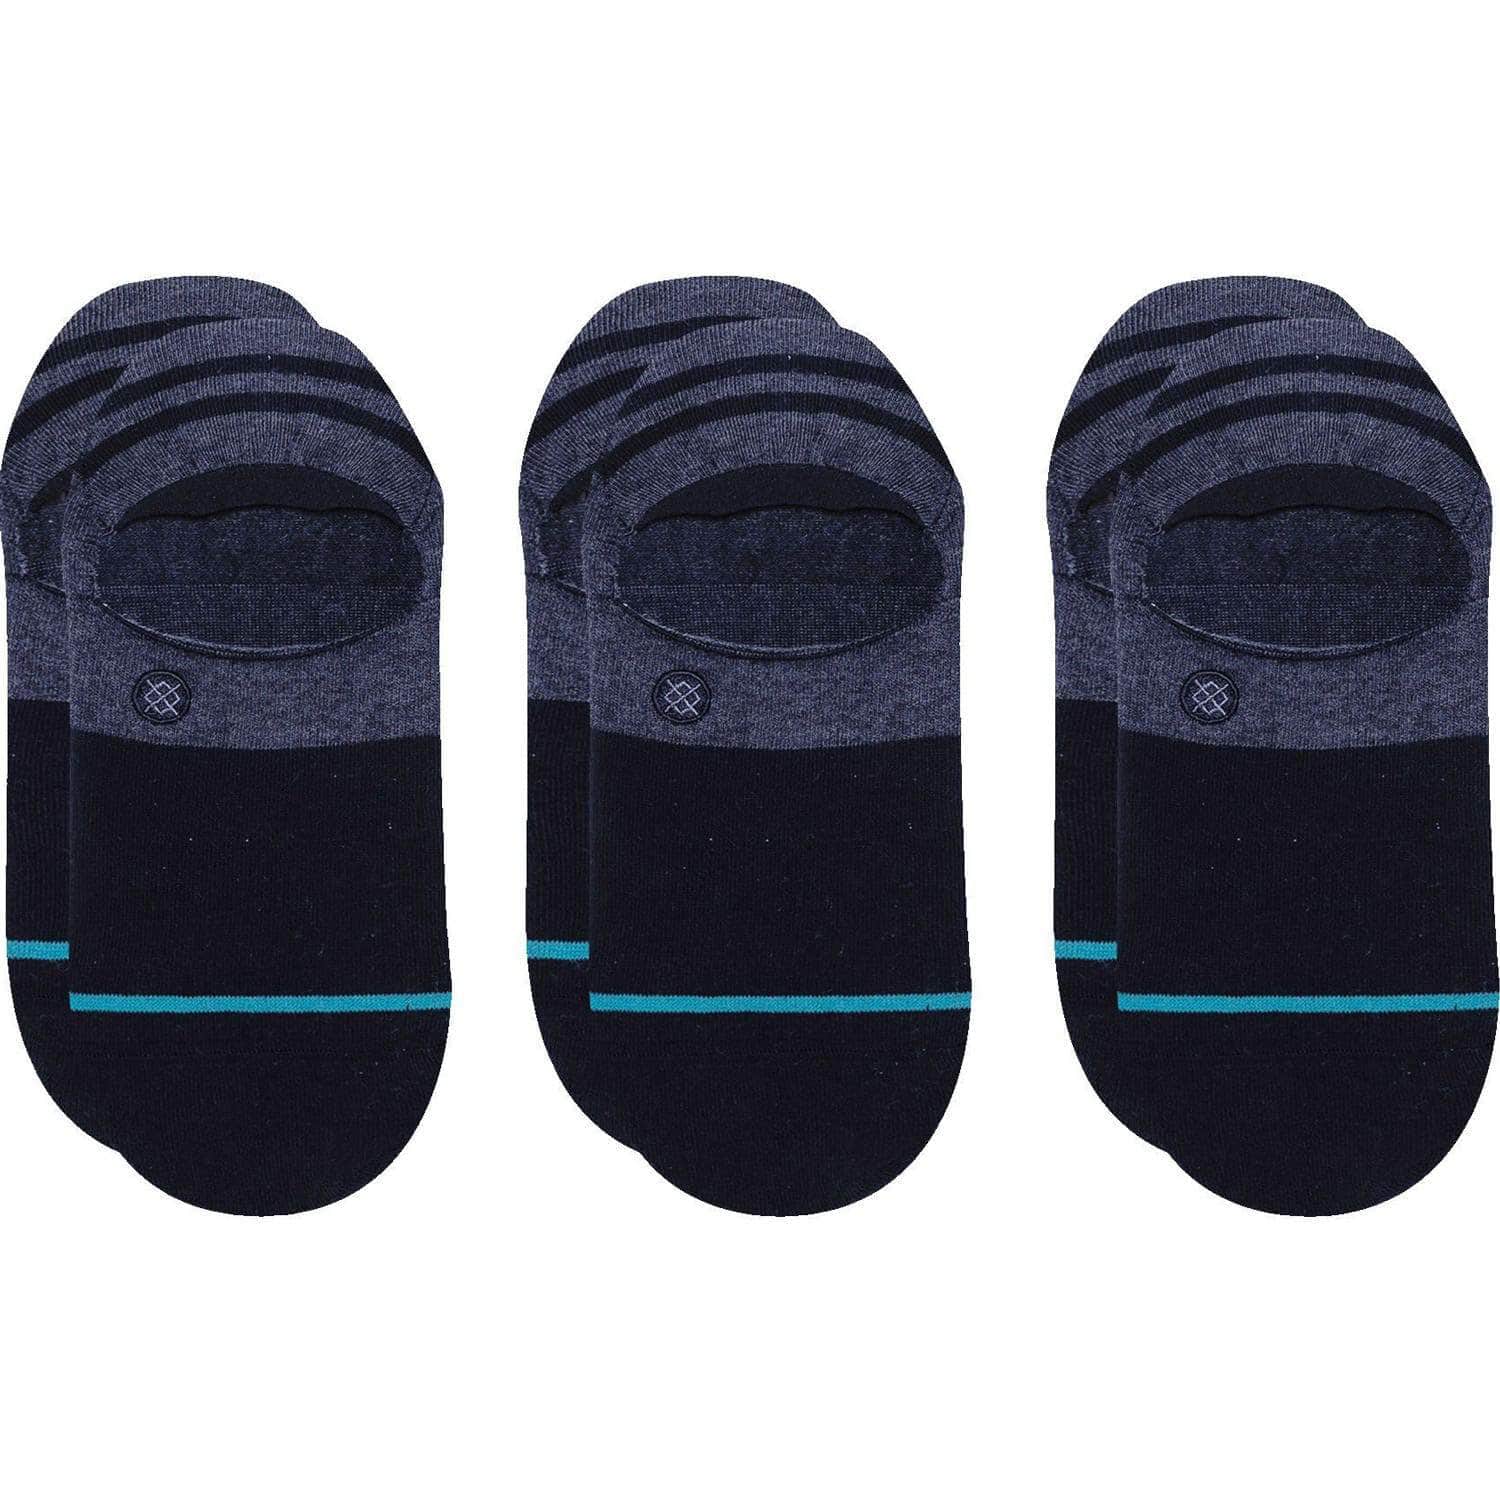 Stance Gamut 2 3 Pack No Show Invisible Socks - Navy - Mens Invisible/No Show Socks by Stance L (UK8-12.5)